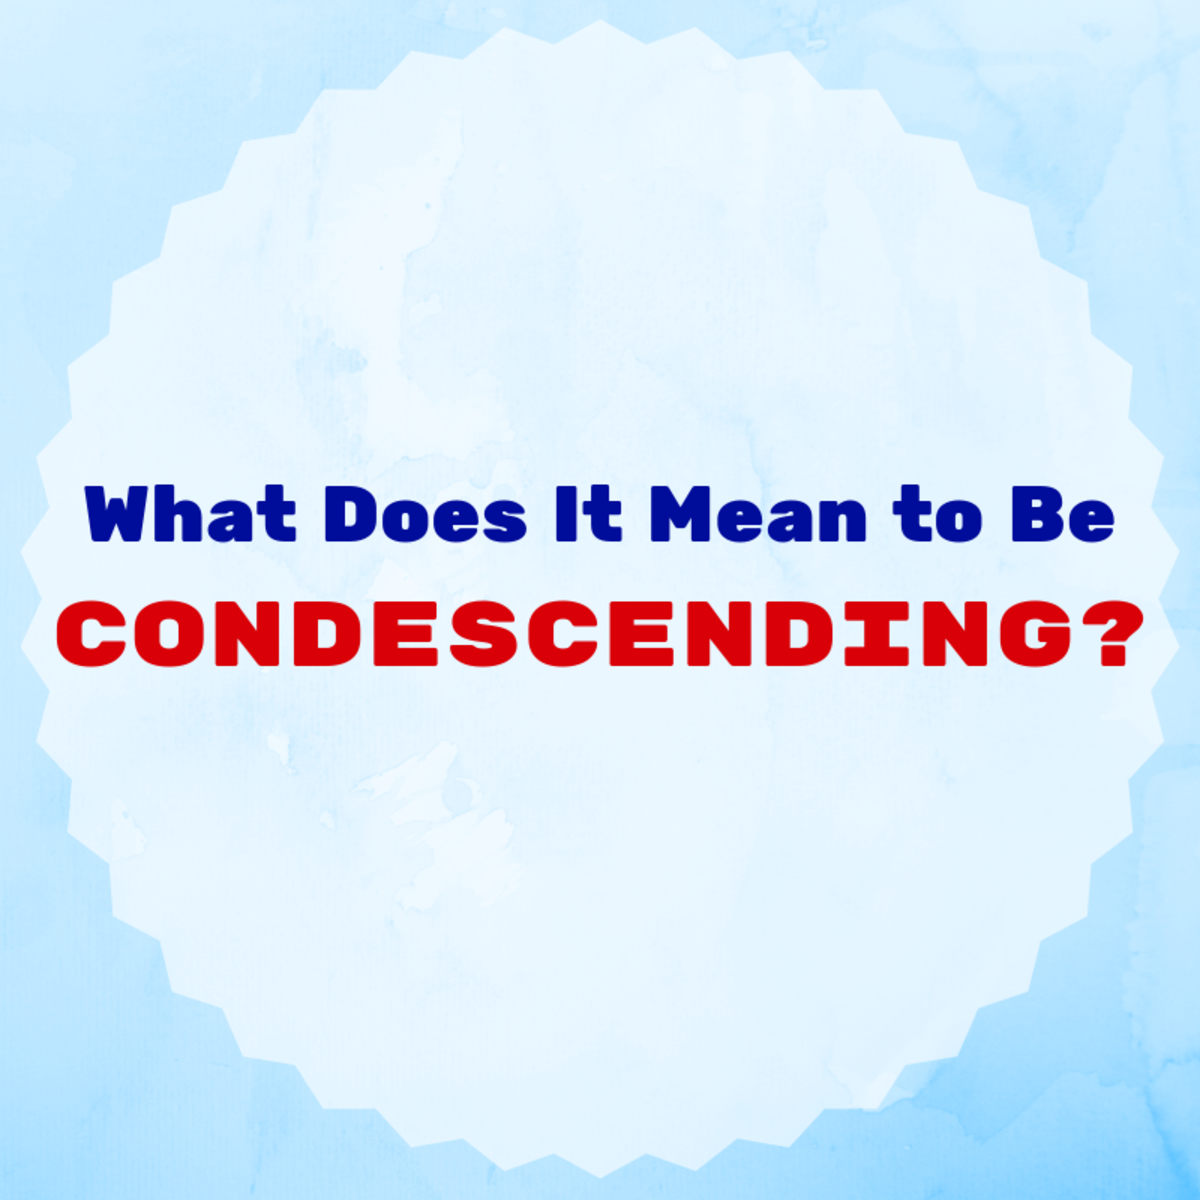 Being called condescending is not a compliment.